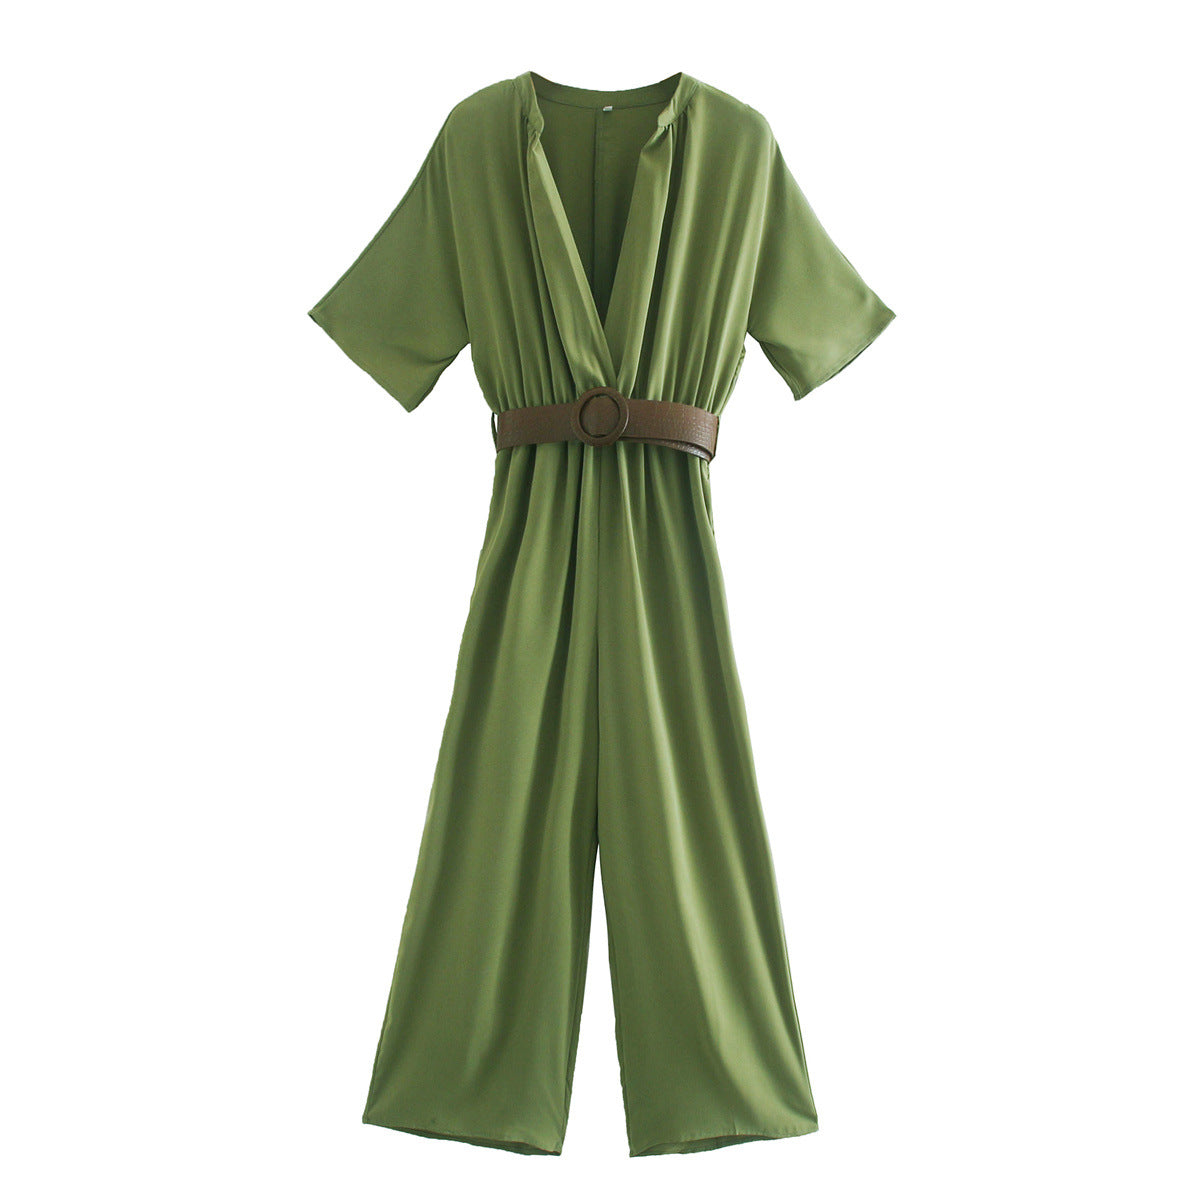 Stand-up collar belt accessory jumpsuit